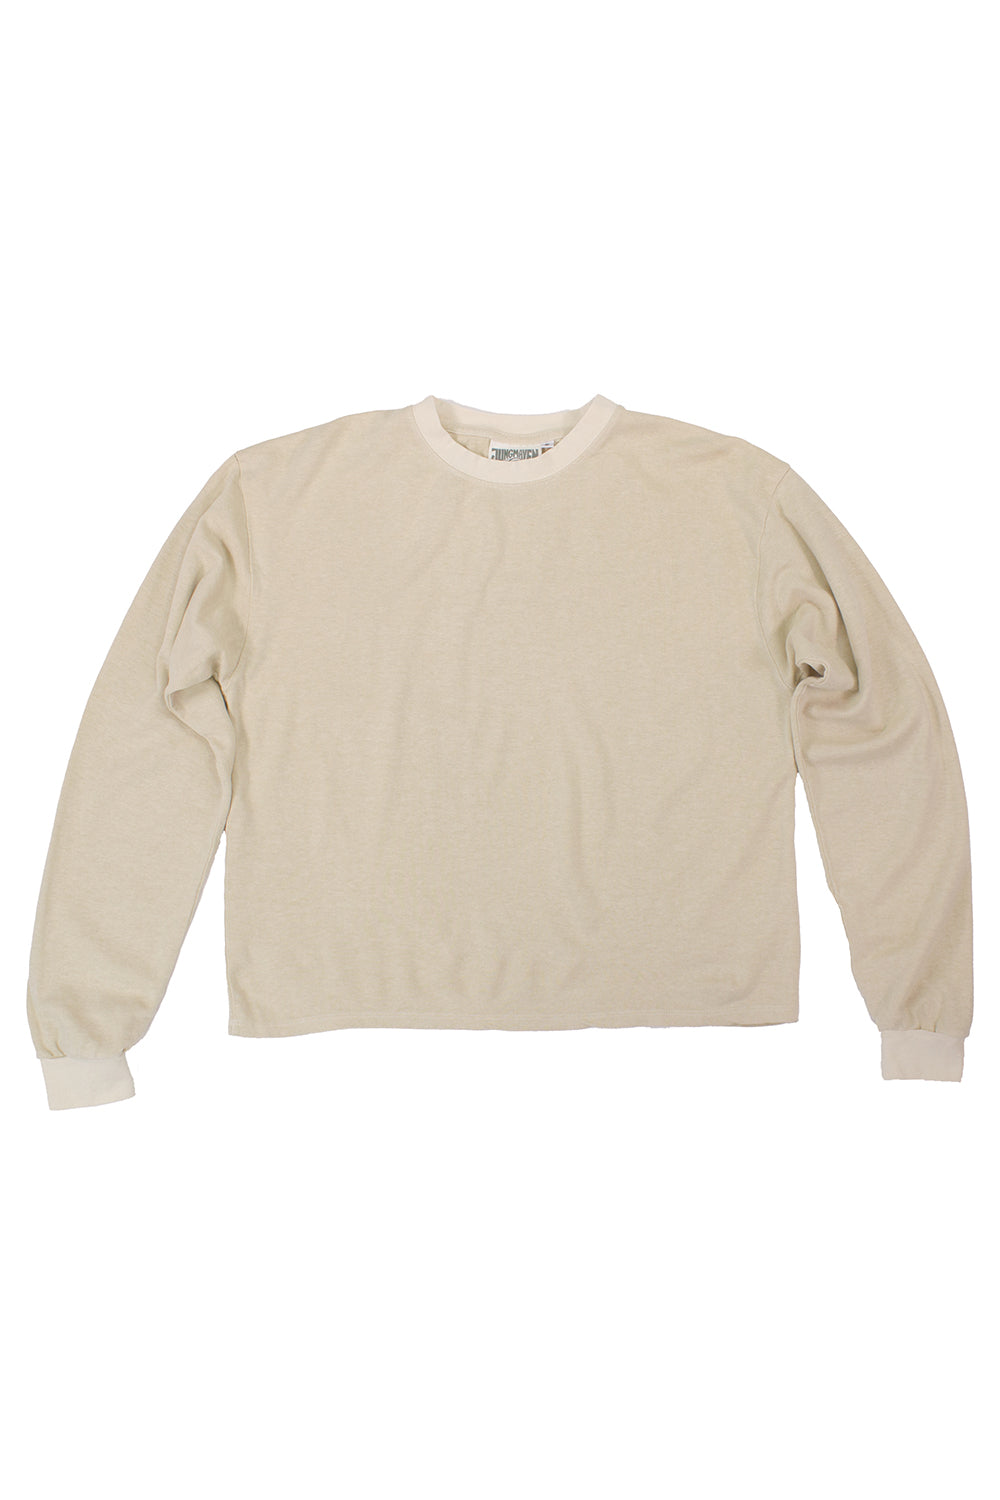 Tatoosh Cropped Long Sleeve Tee | Jungmaven Hemp Clothing & Accessories / Color: Washed White